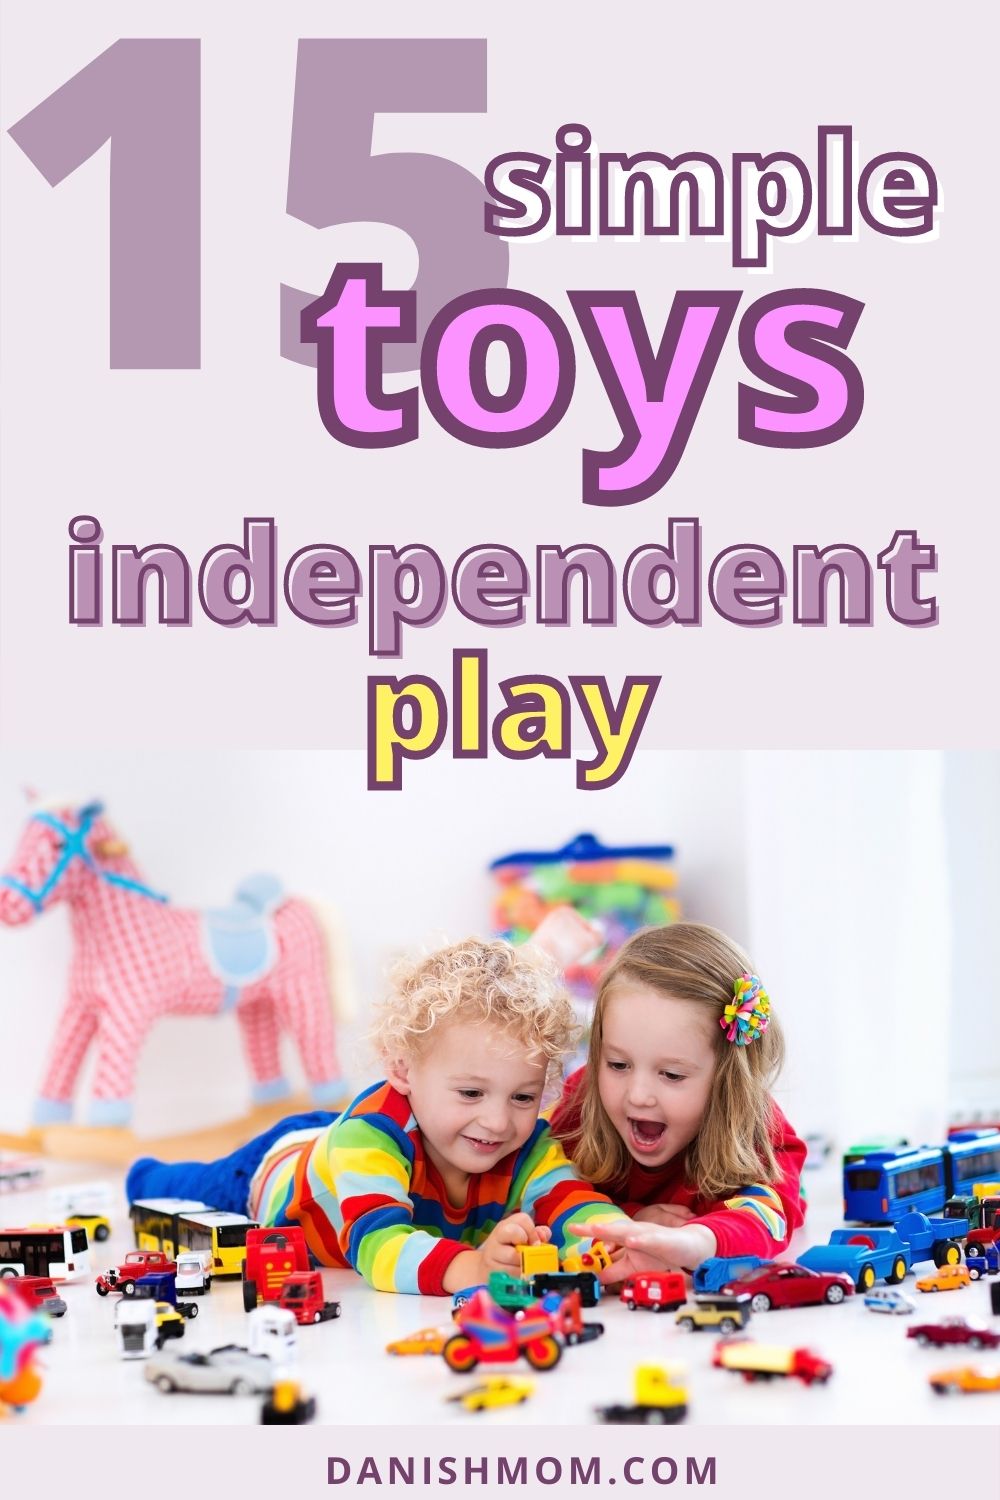 Discover the best toys for independent play that will keep your kids busy for hours. Let them have kids activities with these open ended toys for babies, toddlers and pre-schoolers.